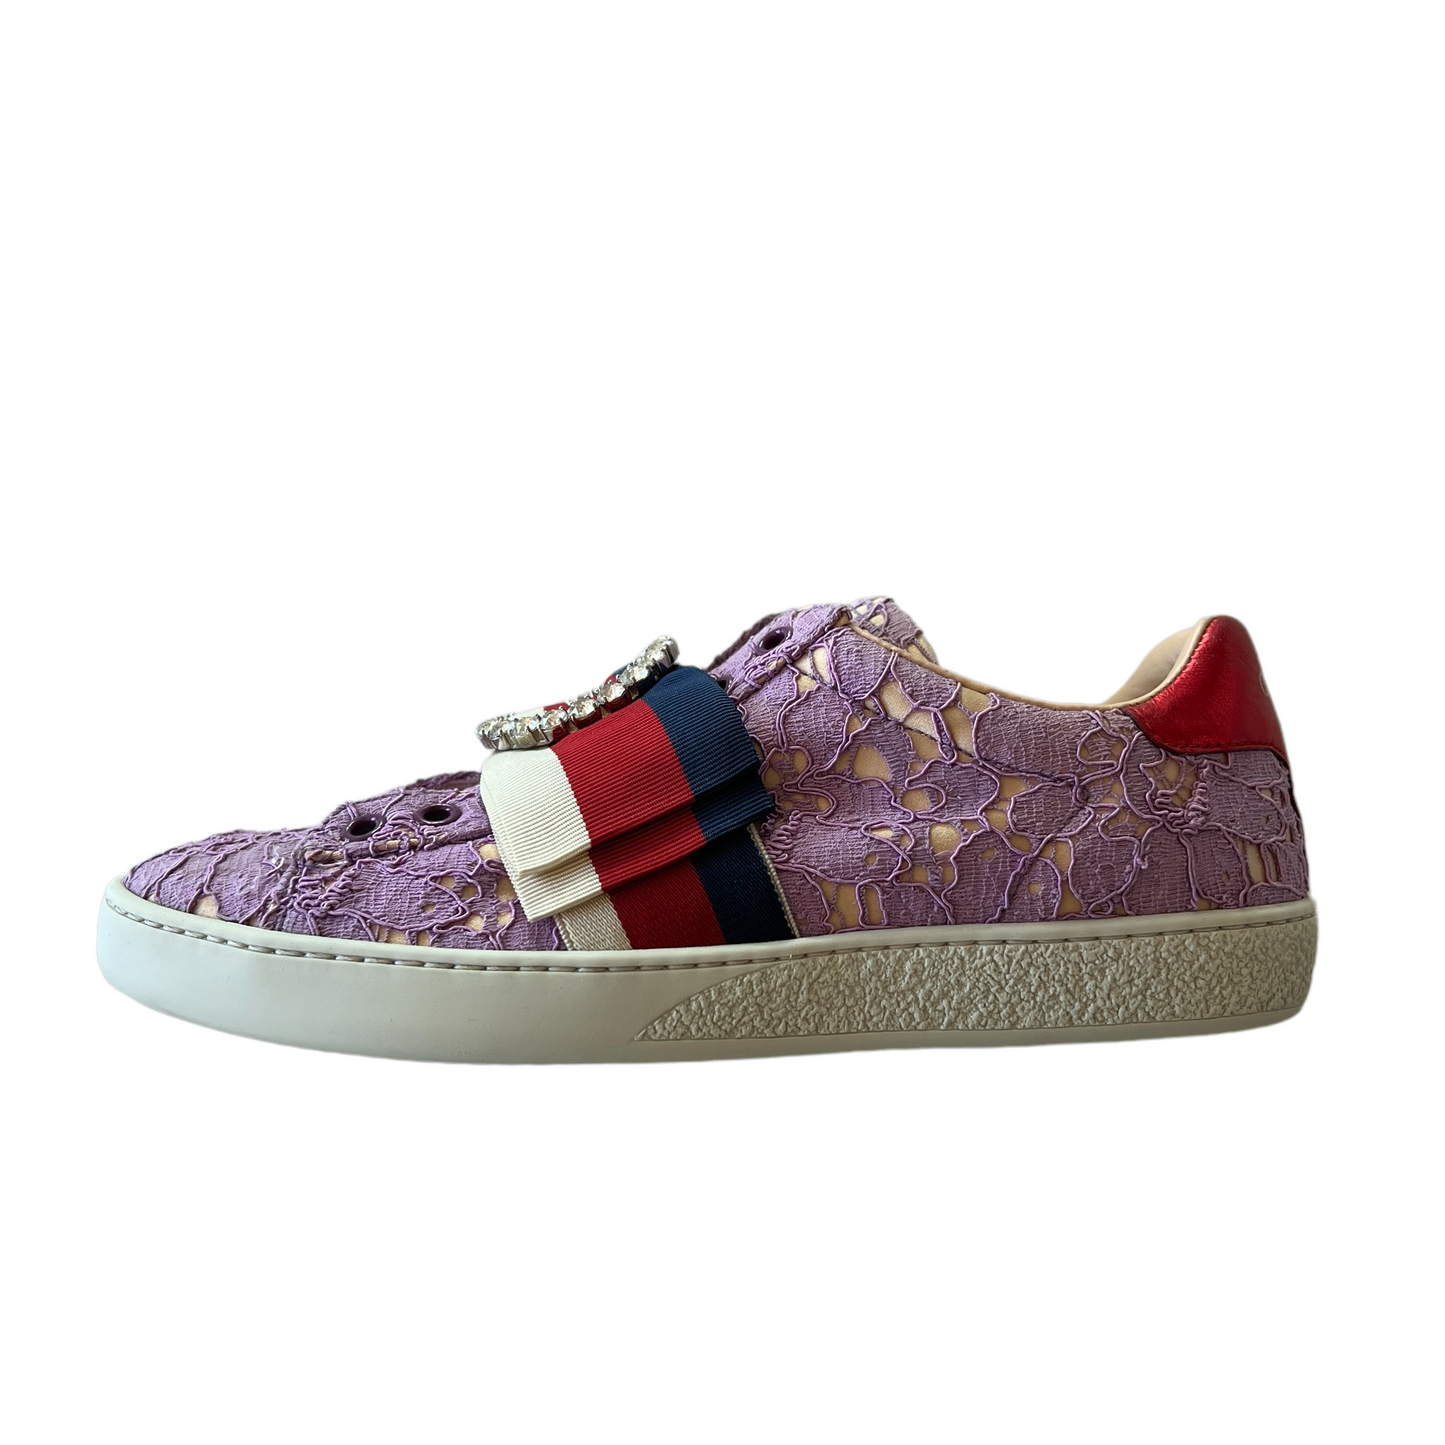 Purple Lace and Crystals Sneakers - 7